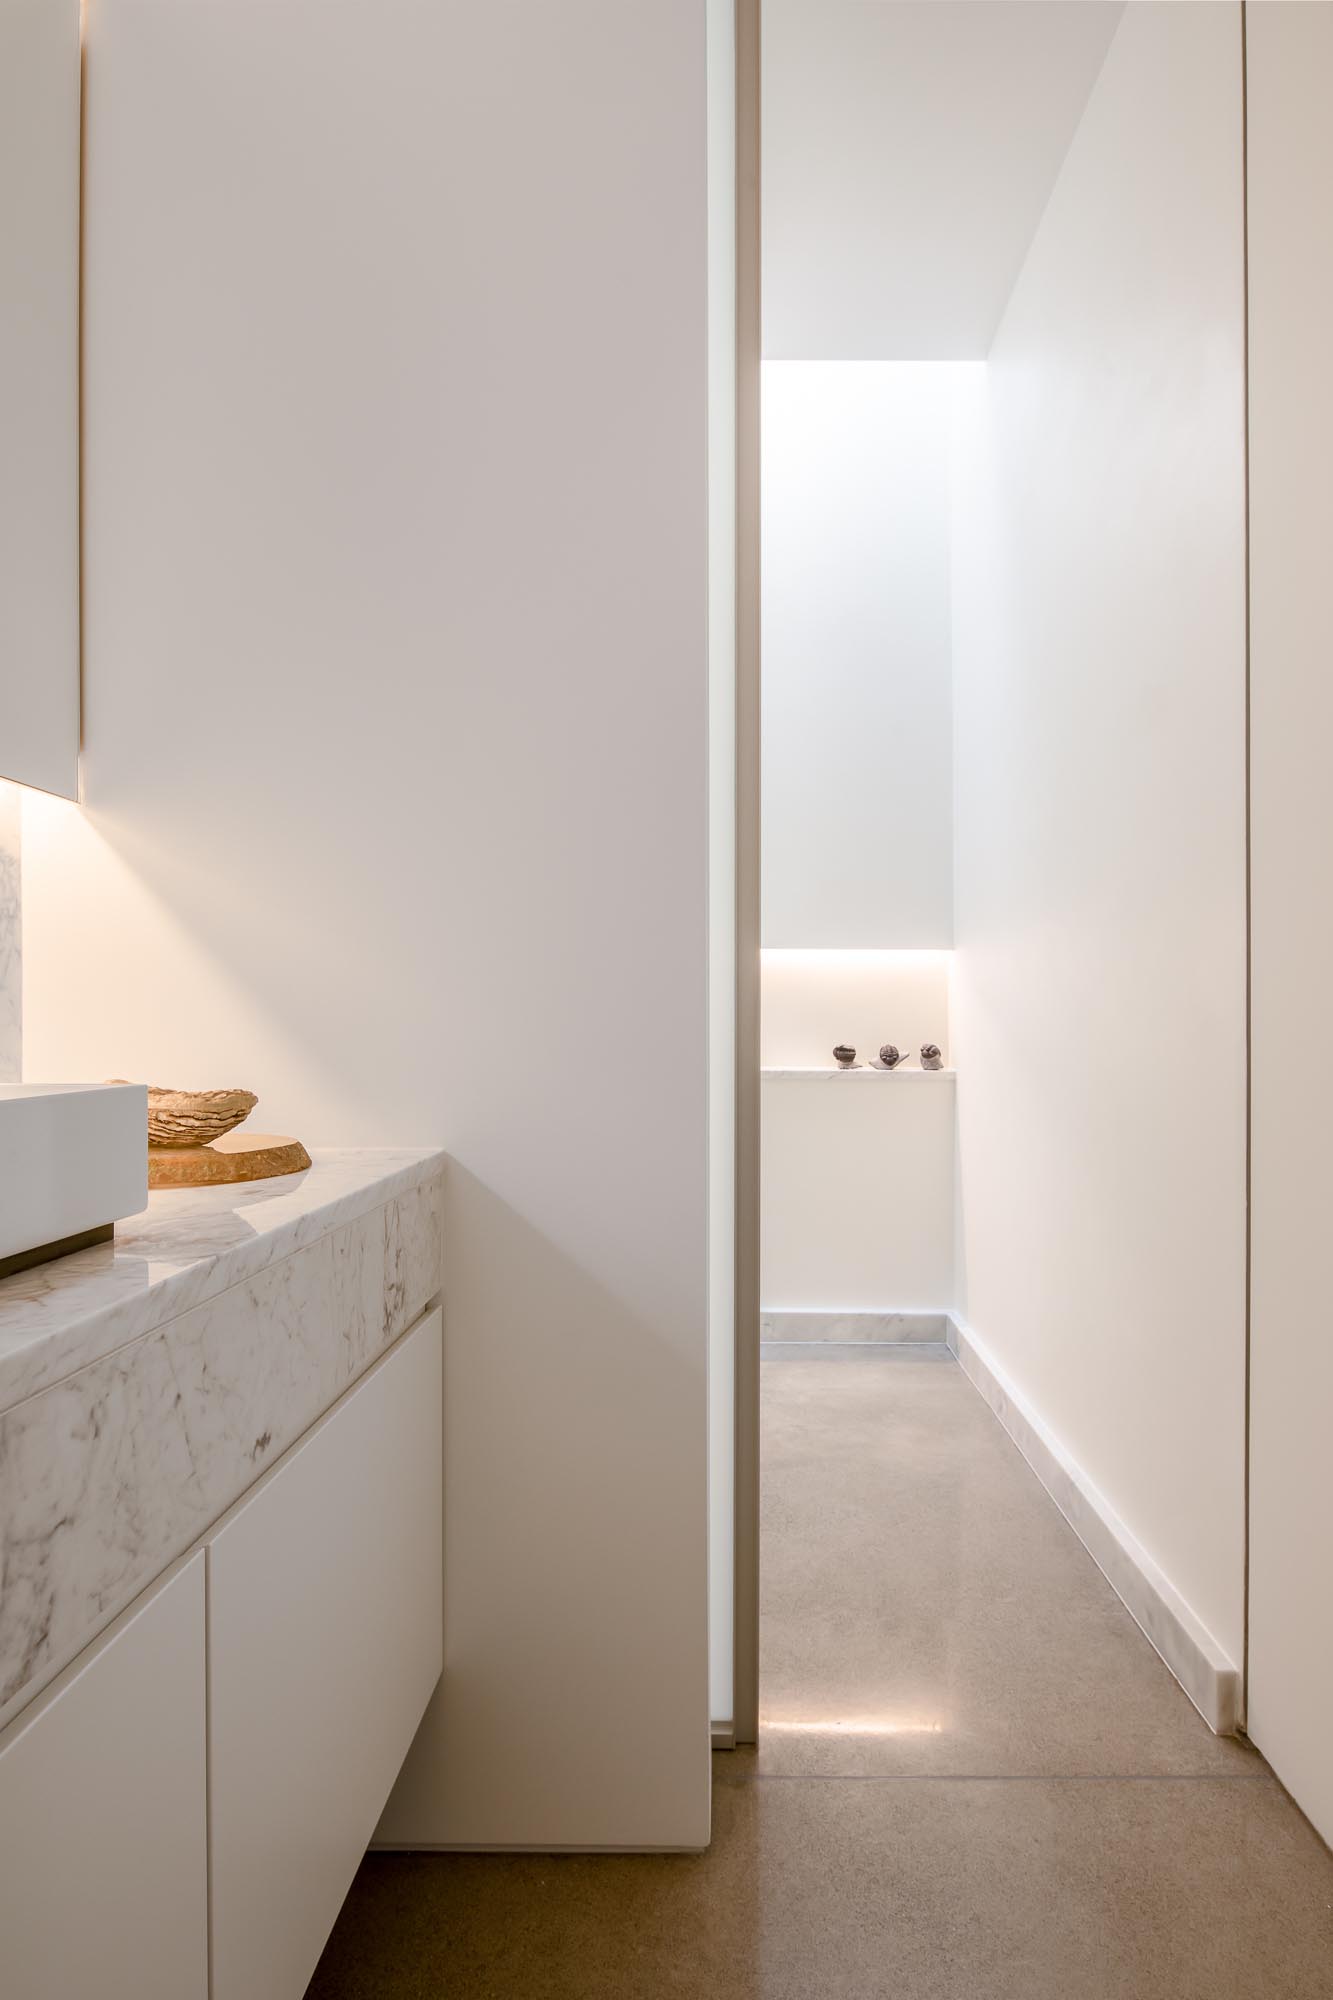 This modern en-suite bathroom has a backlit mirror, a floating vanity, and a walk-in shower with a shelving niche.